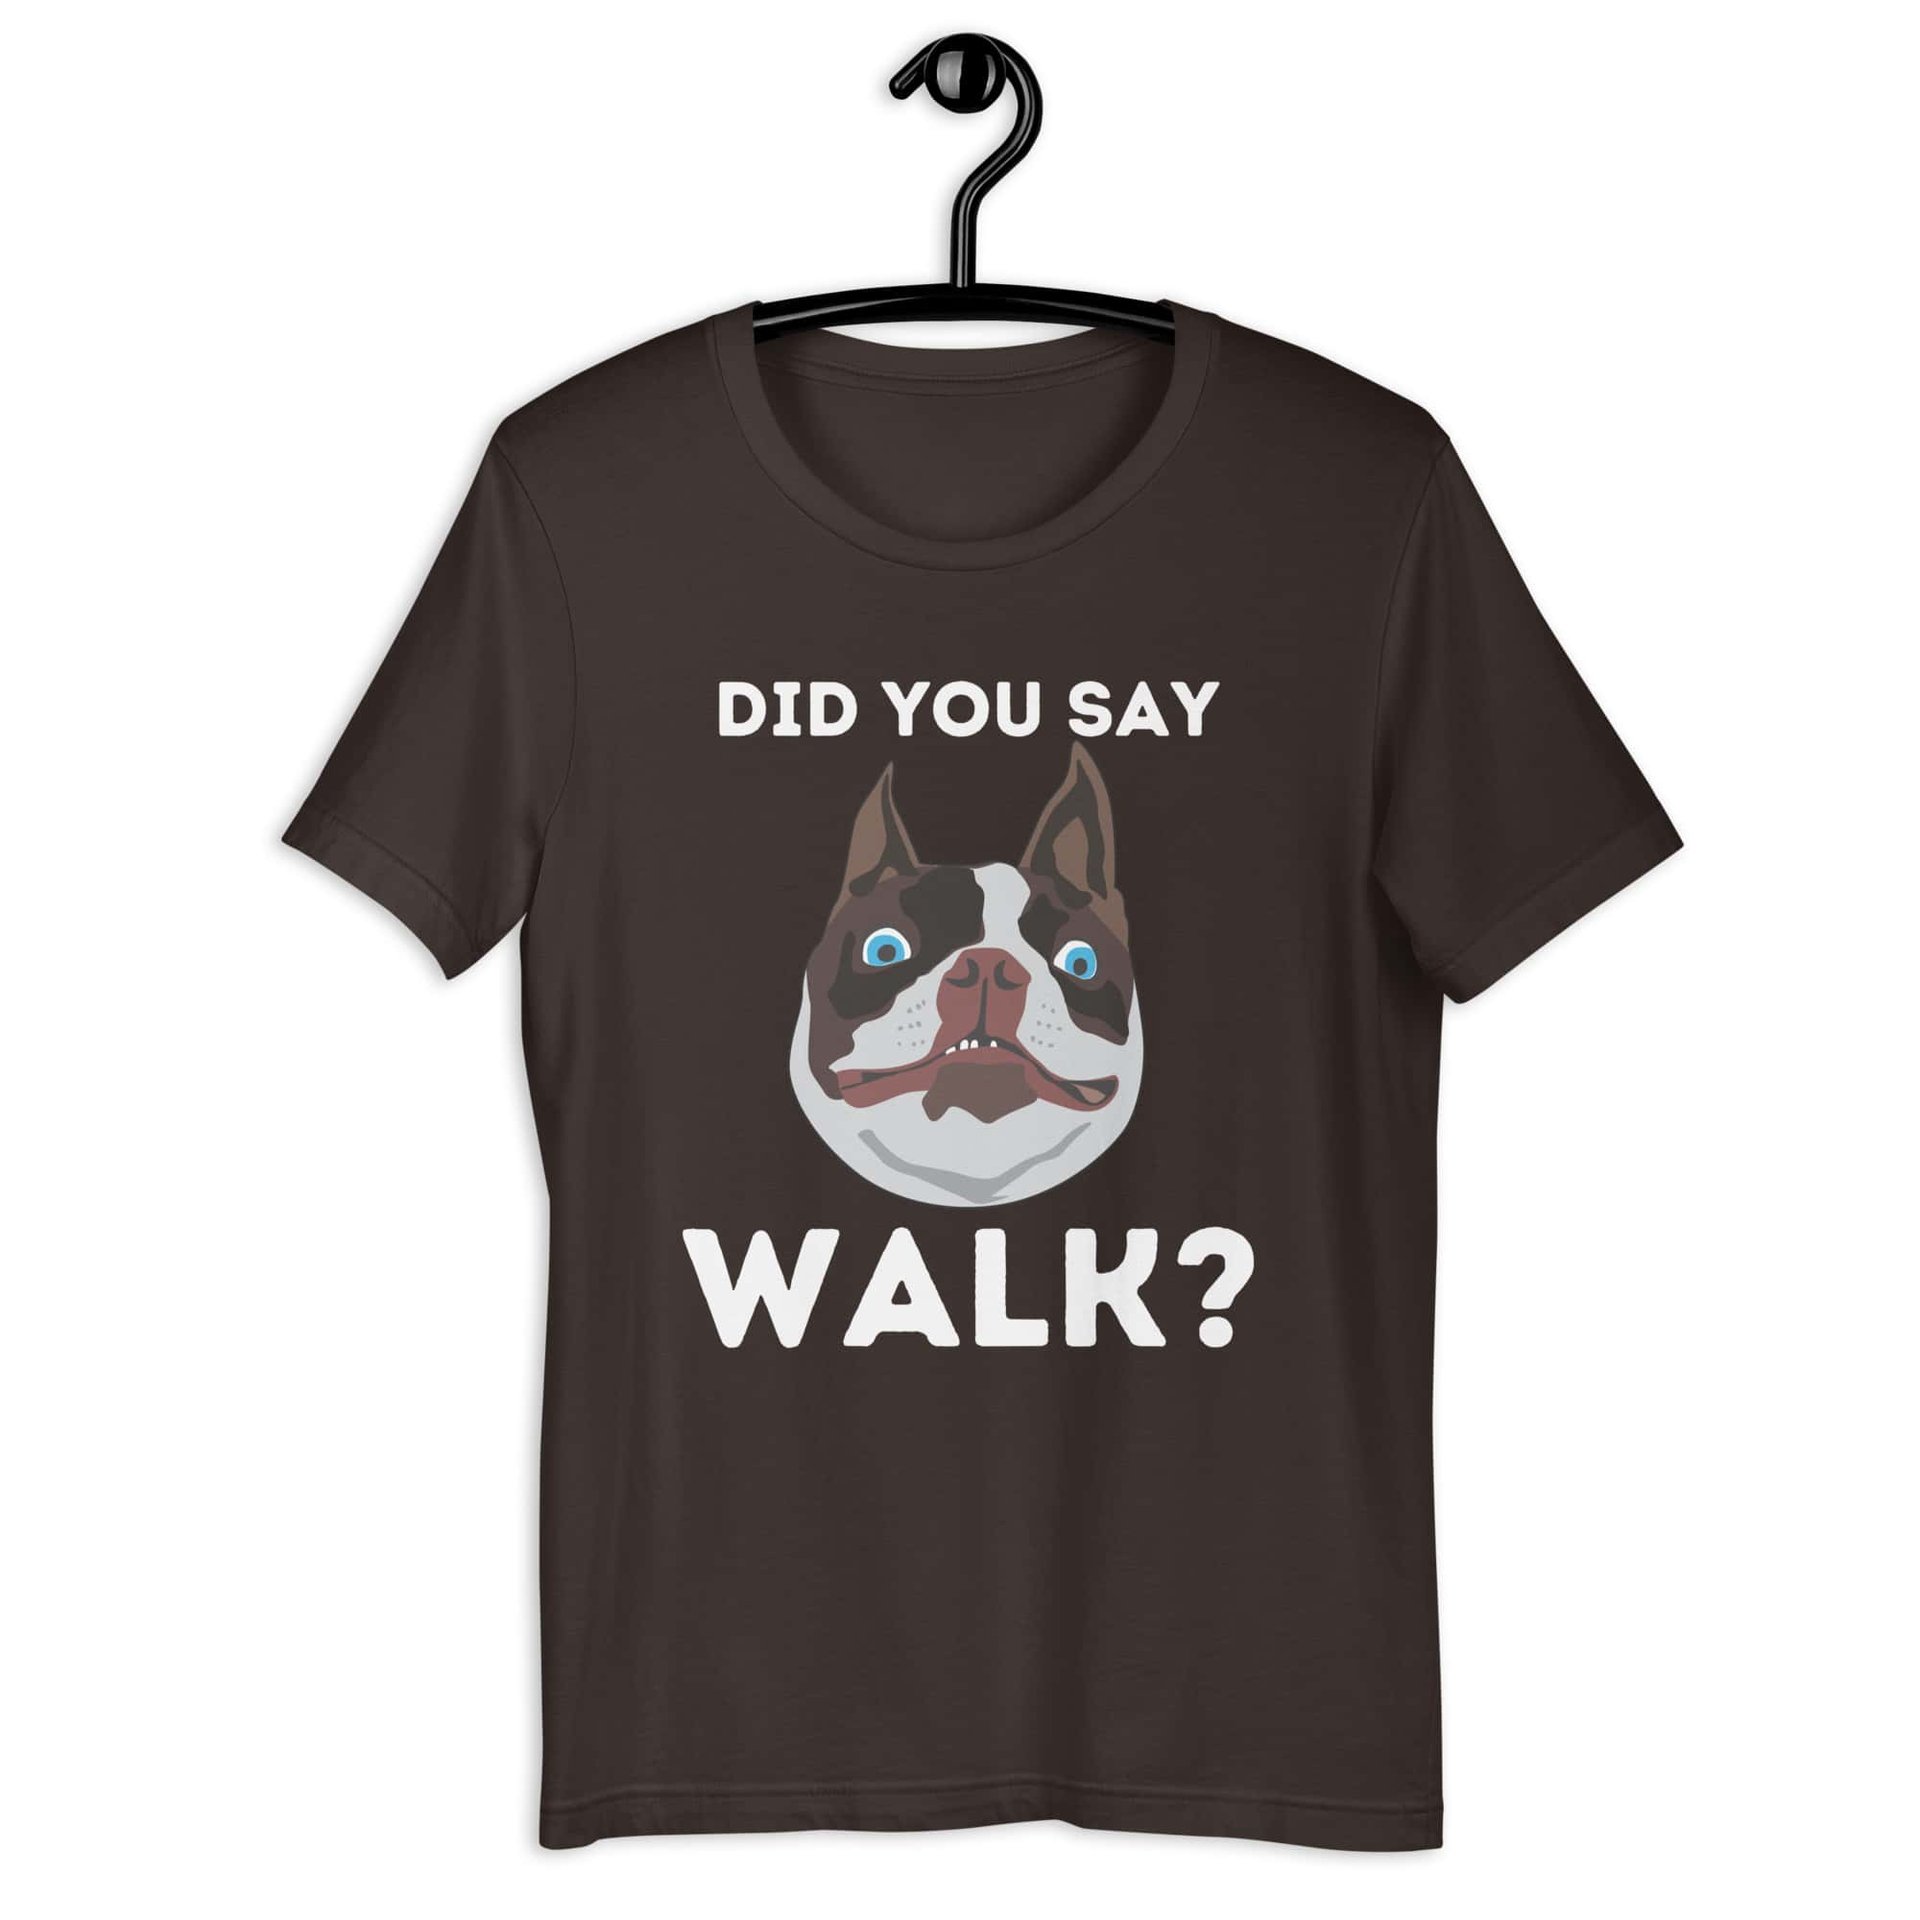 "Did You Say Walk?" Funny Dog Unisex T-Shirt. Brown